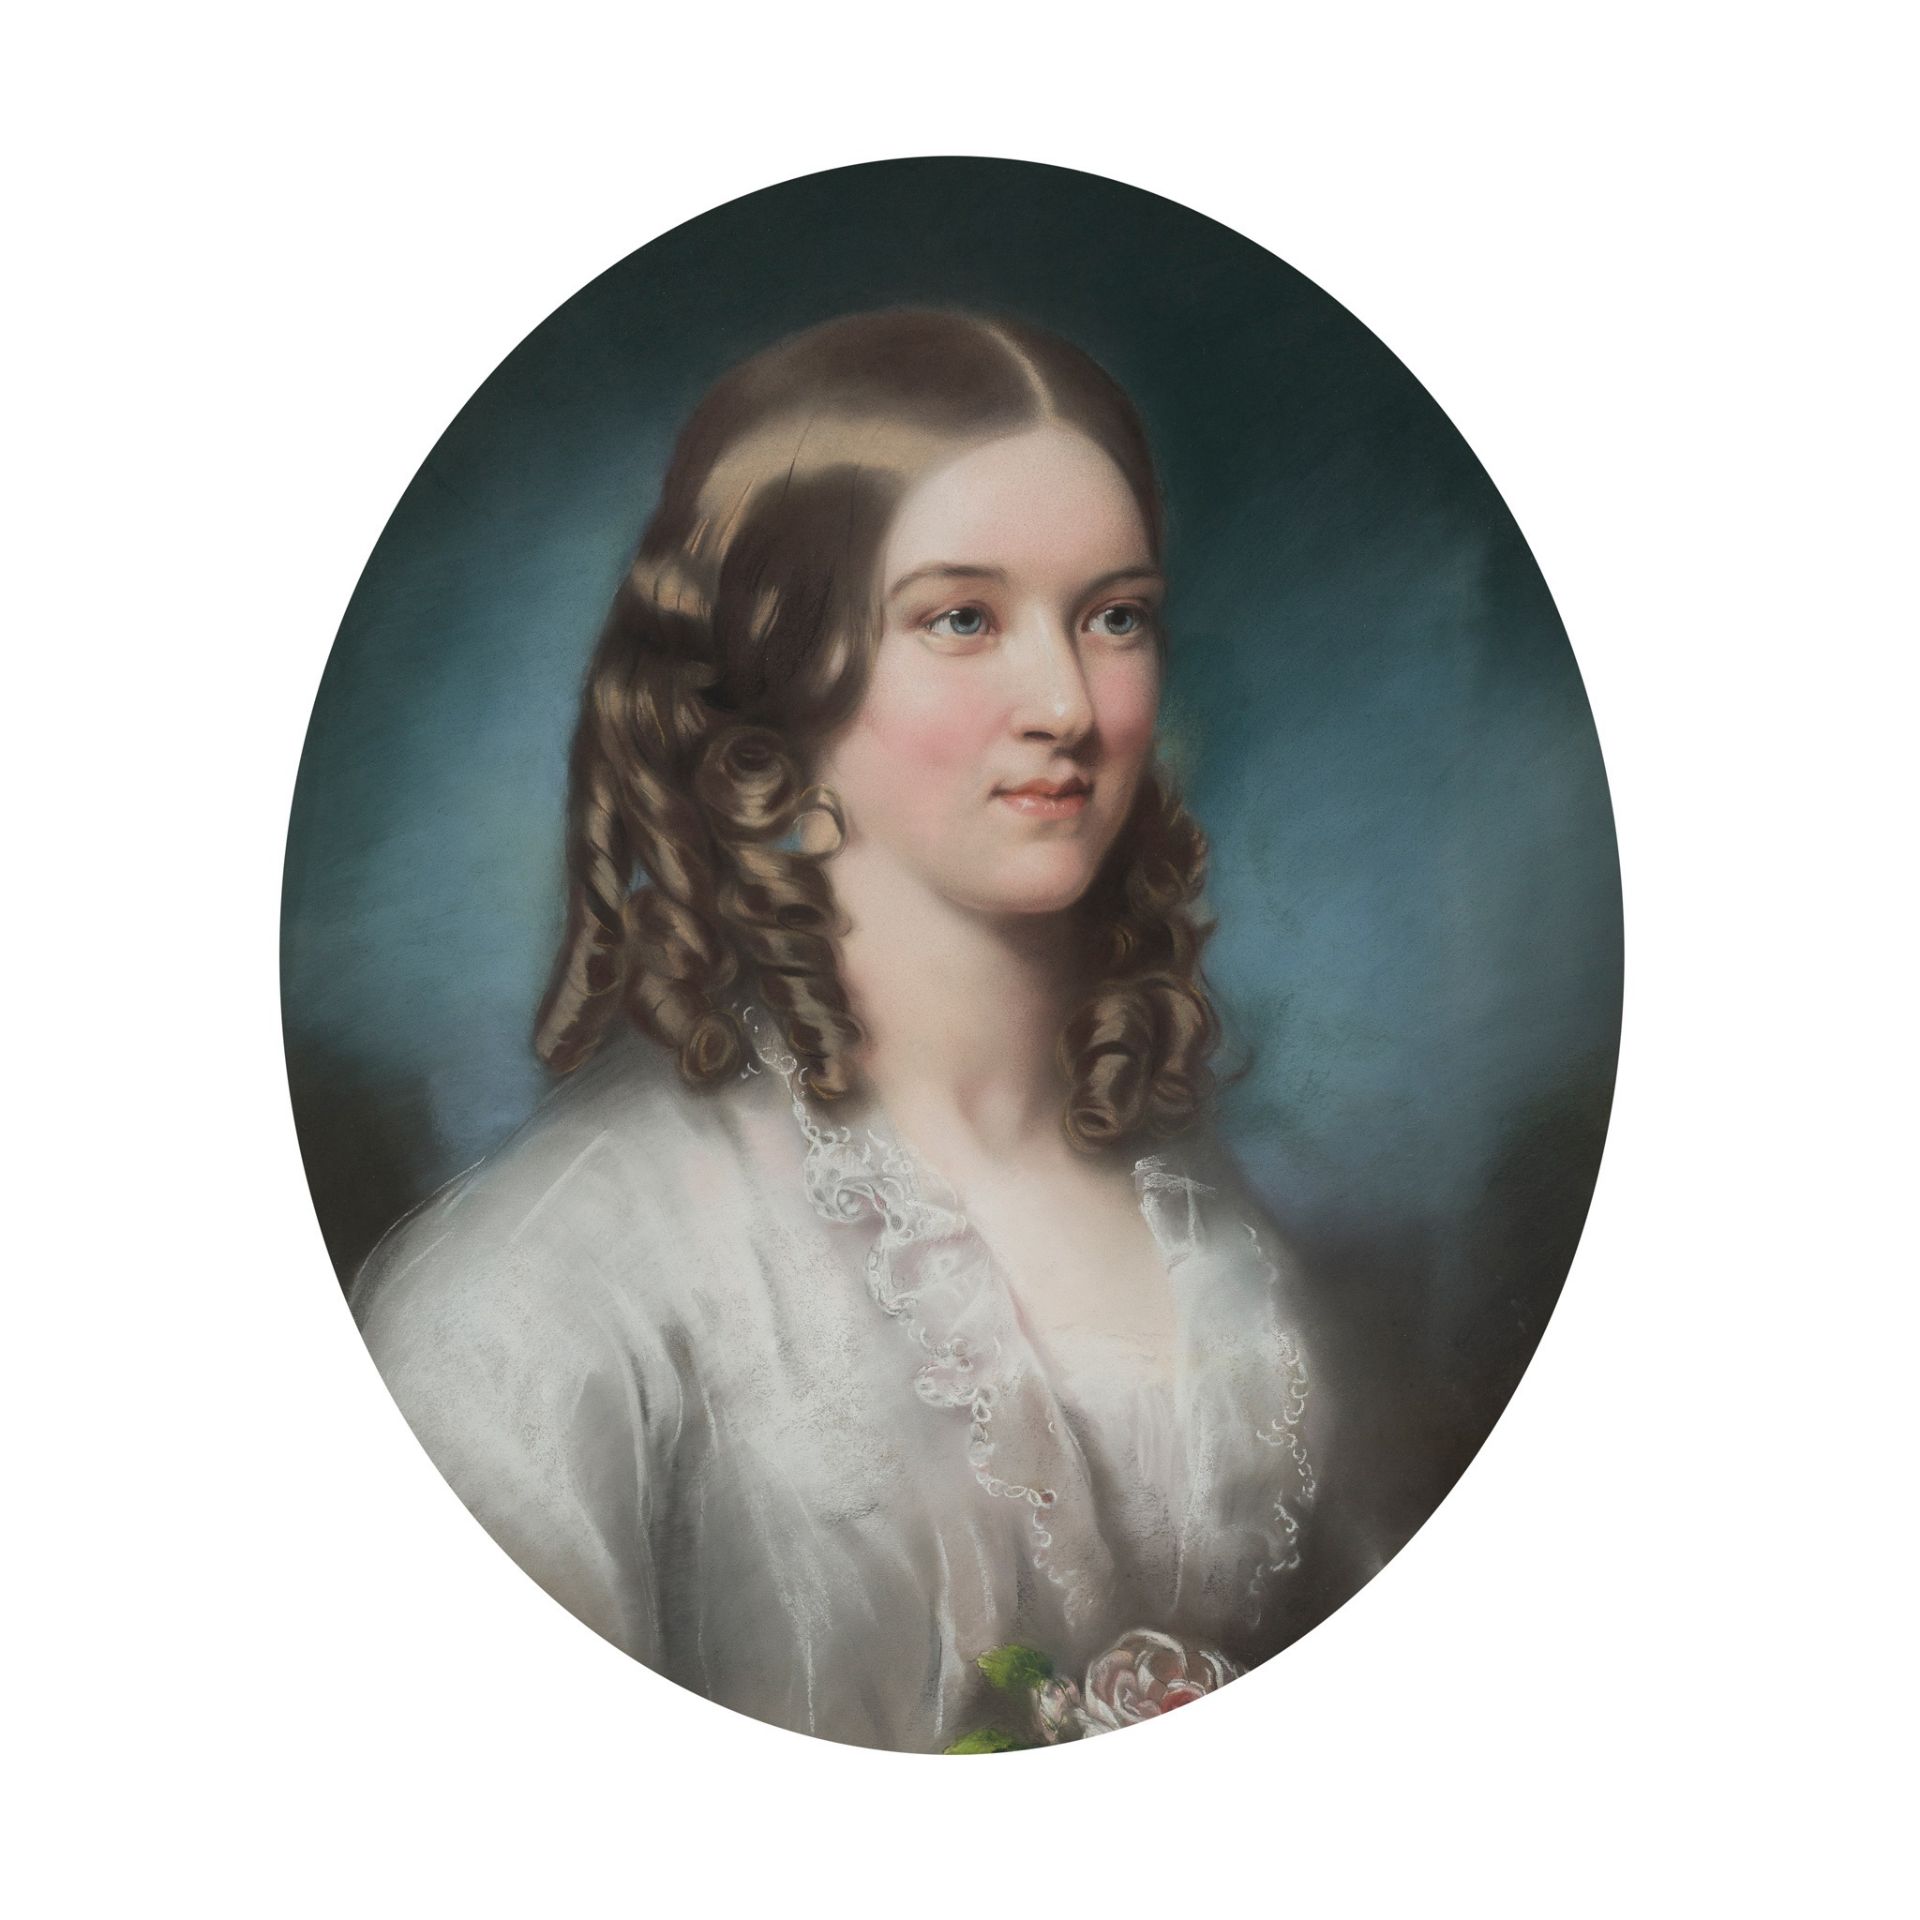 ATTRIBUTED TO JAMES ARCHER (SCOTTISH 1823-1904) HEAD AND SHOULDERS PORTRAIT OF A GIRL WITH RINGLETS - Image 2 of 5